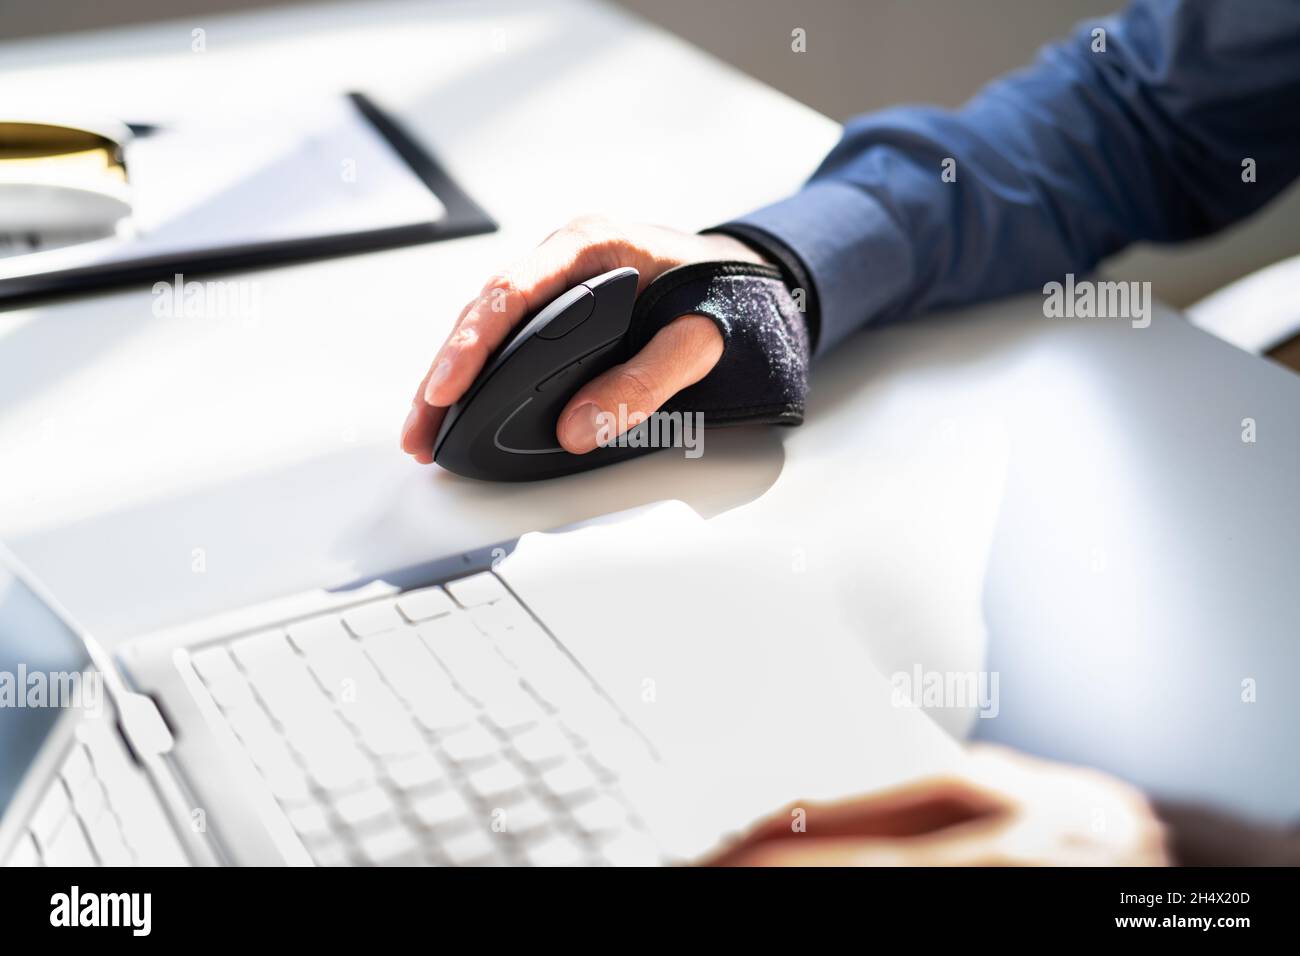 Vertical Ergonomic Optical Mouse For Carpal Tunnel Syndrome Prevention  Stock Photo - Alamy